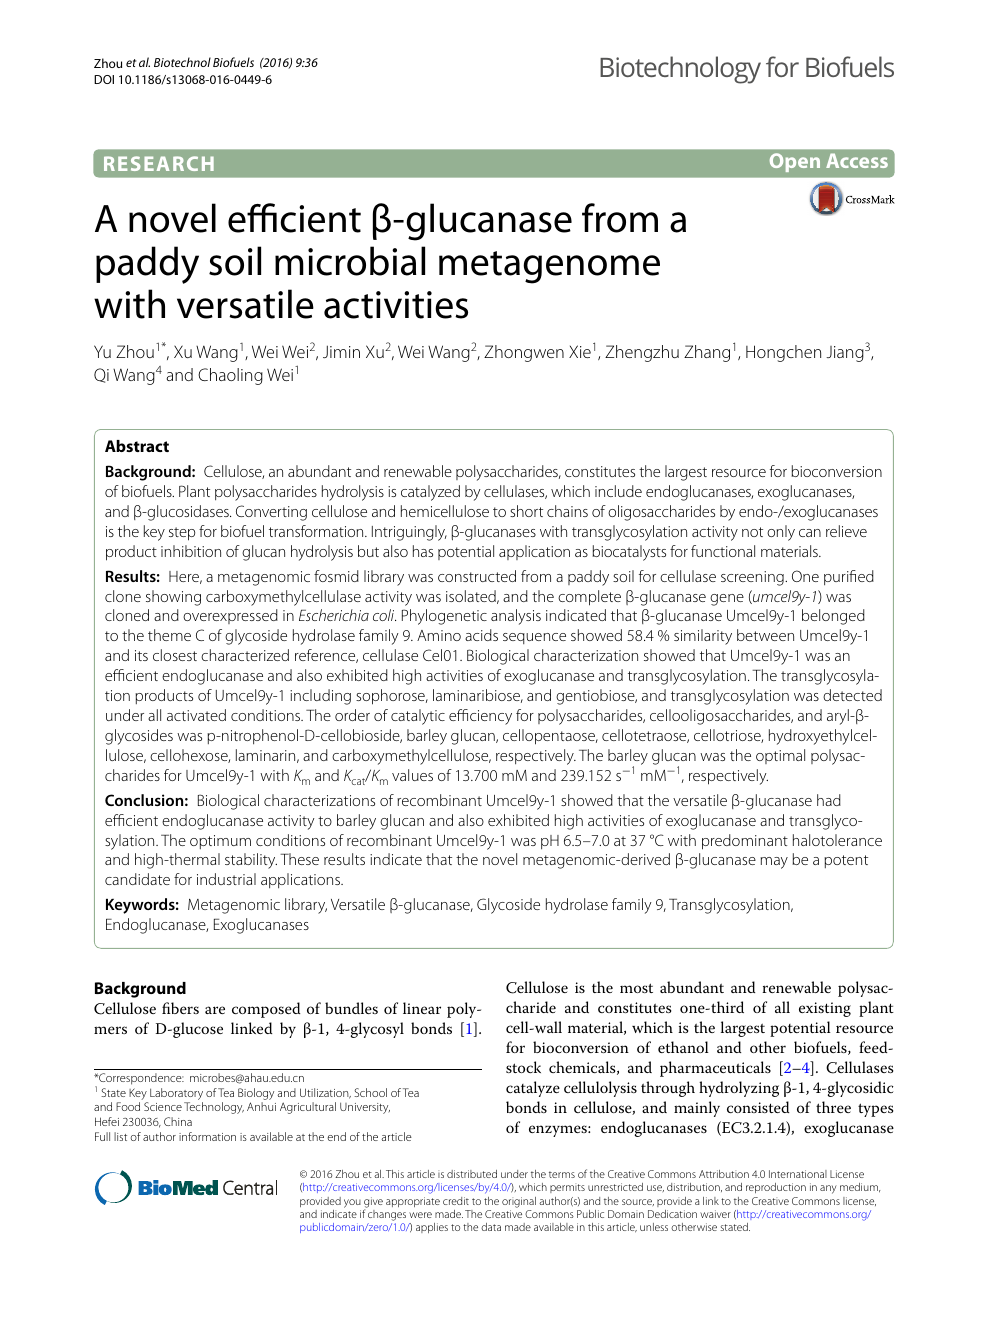 A Novel Efficient B Glucanase From A Paddy Soil Microbial Metagenome With Versatile Activities Topic Of Research Paper In Biological Sciences Download Scholarly Article Pdf And Read For Free On Cyberleninka Open